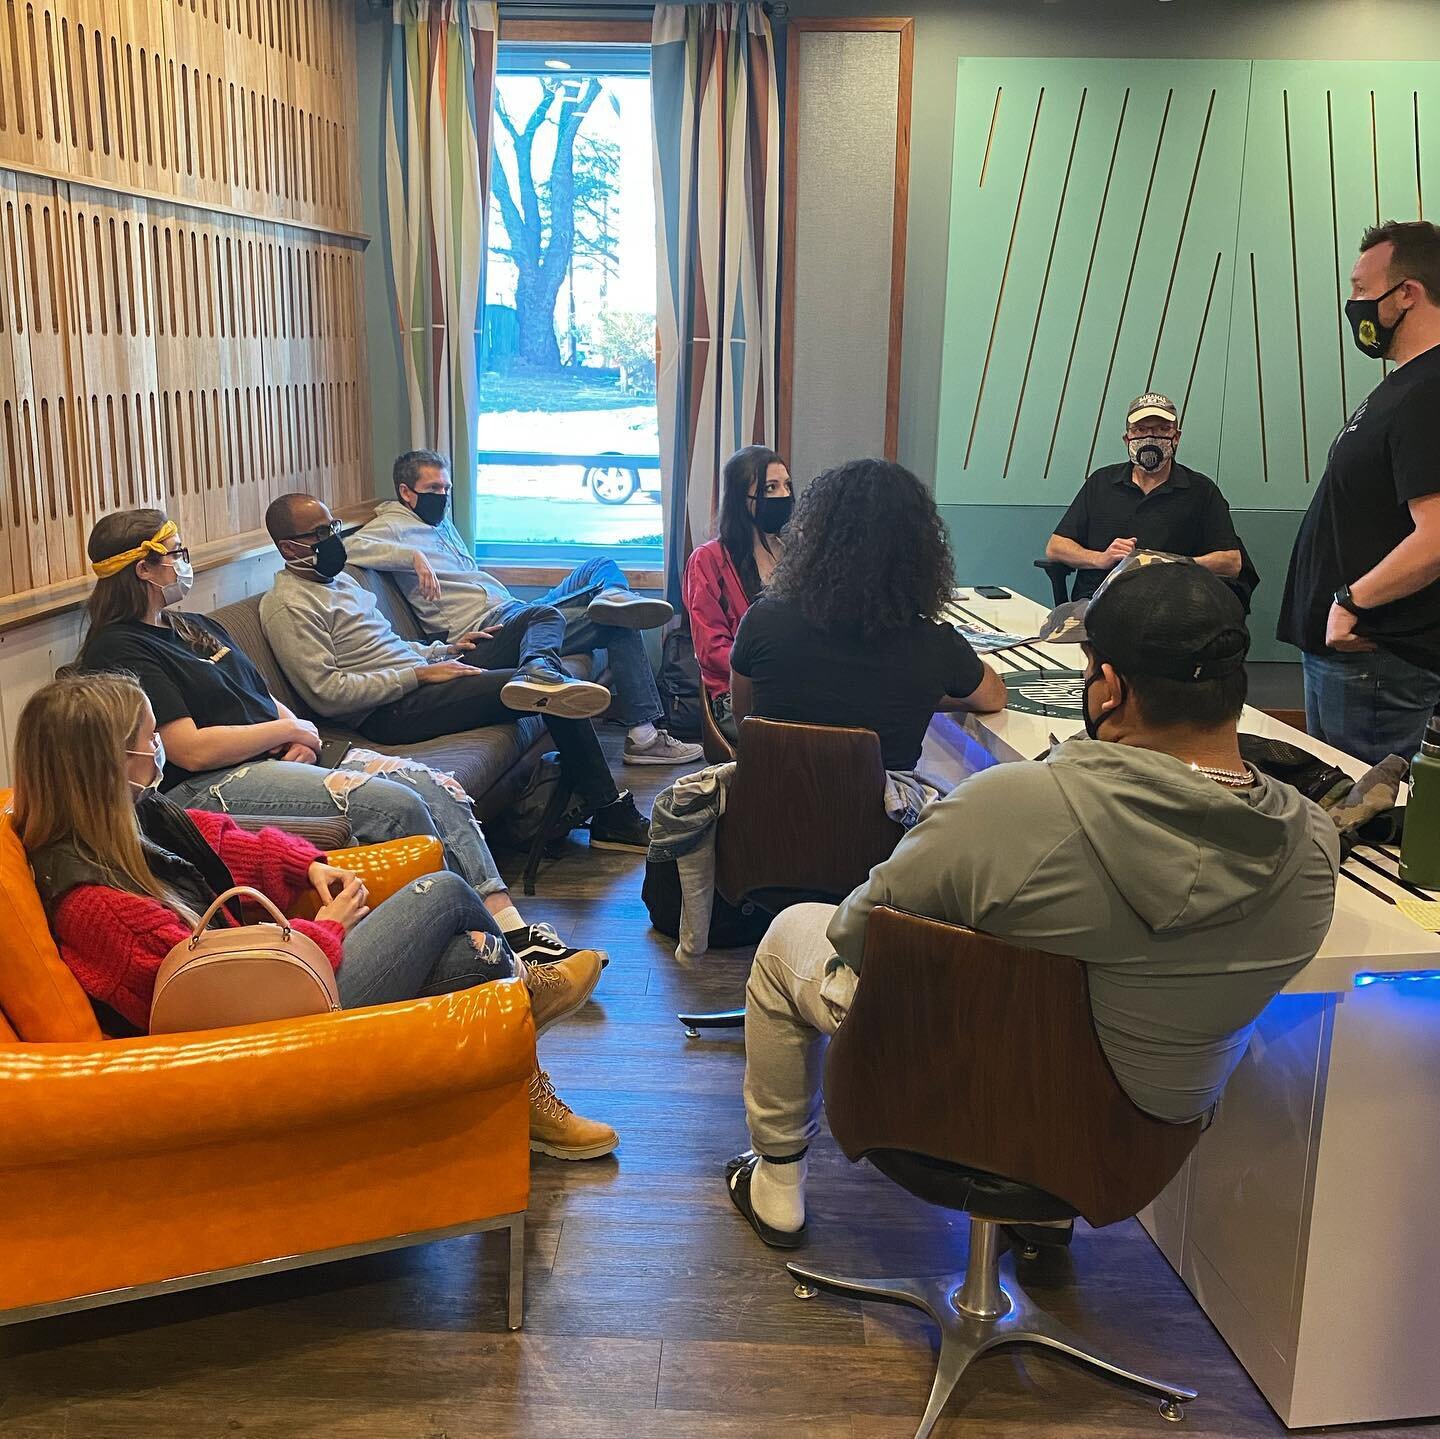 Last night was a blast for the kickoff of our Recording Arts song creation group project. During our 25 week program our students will engage in several projects. This one focuses on creating a song from scratch. It spans several weeks and is a colla